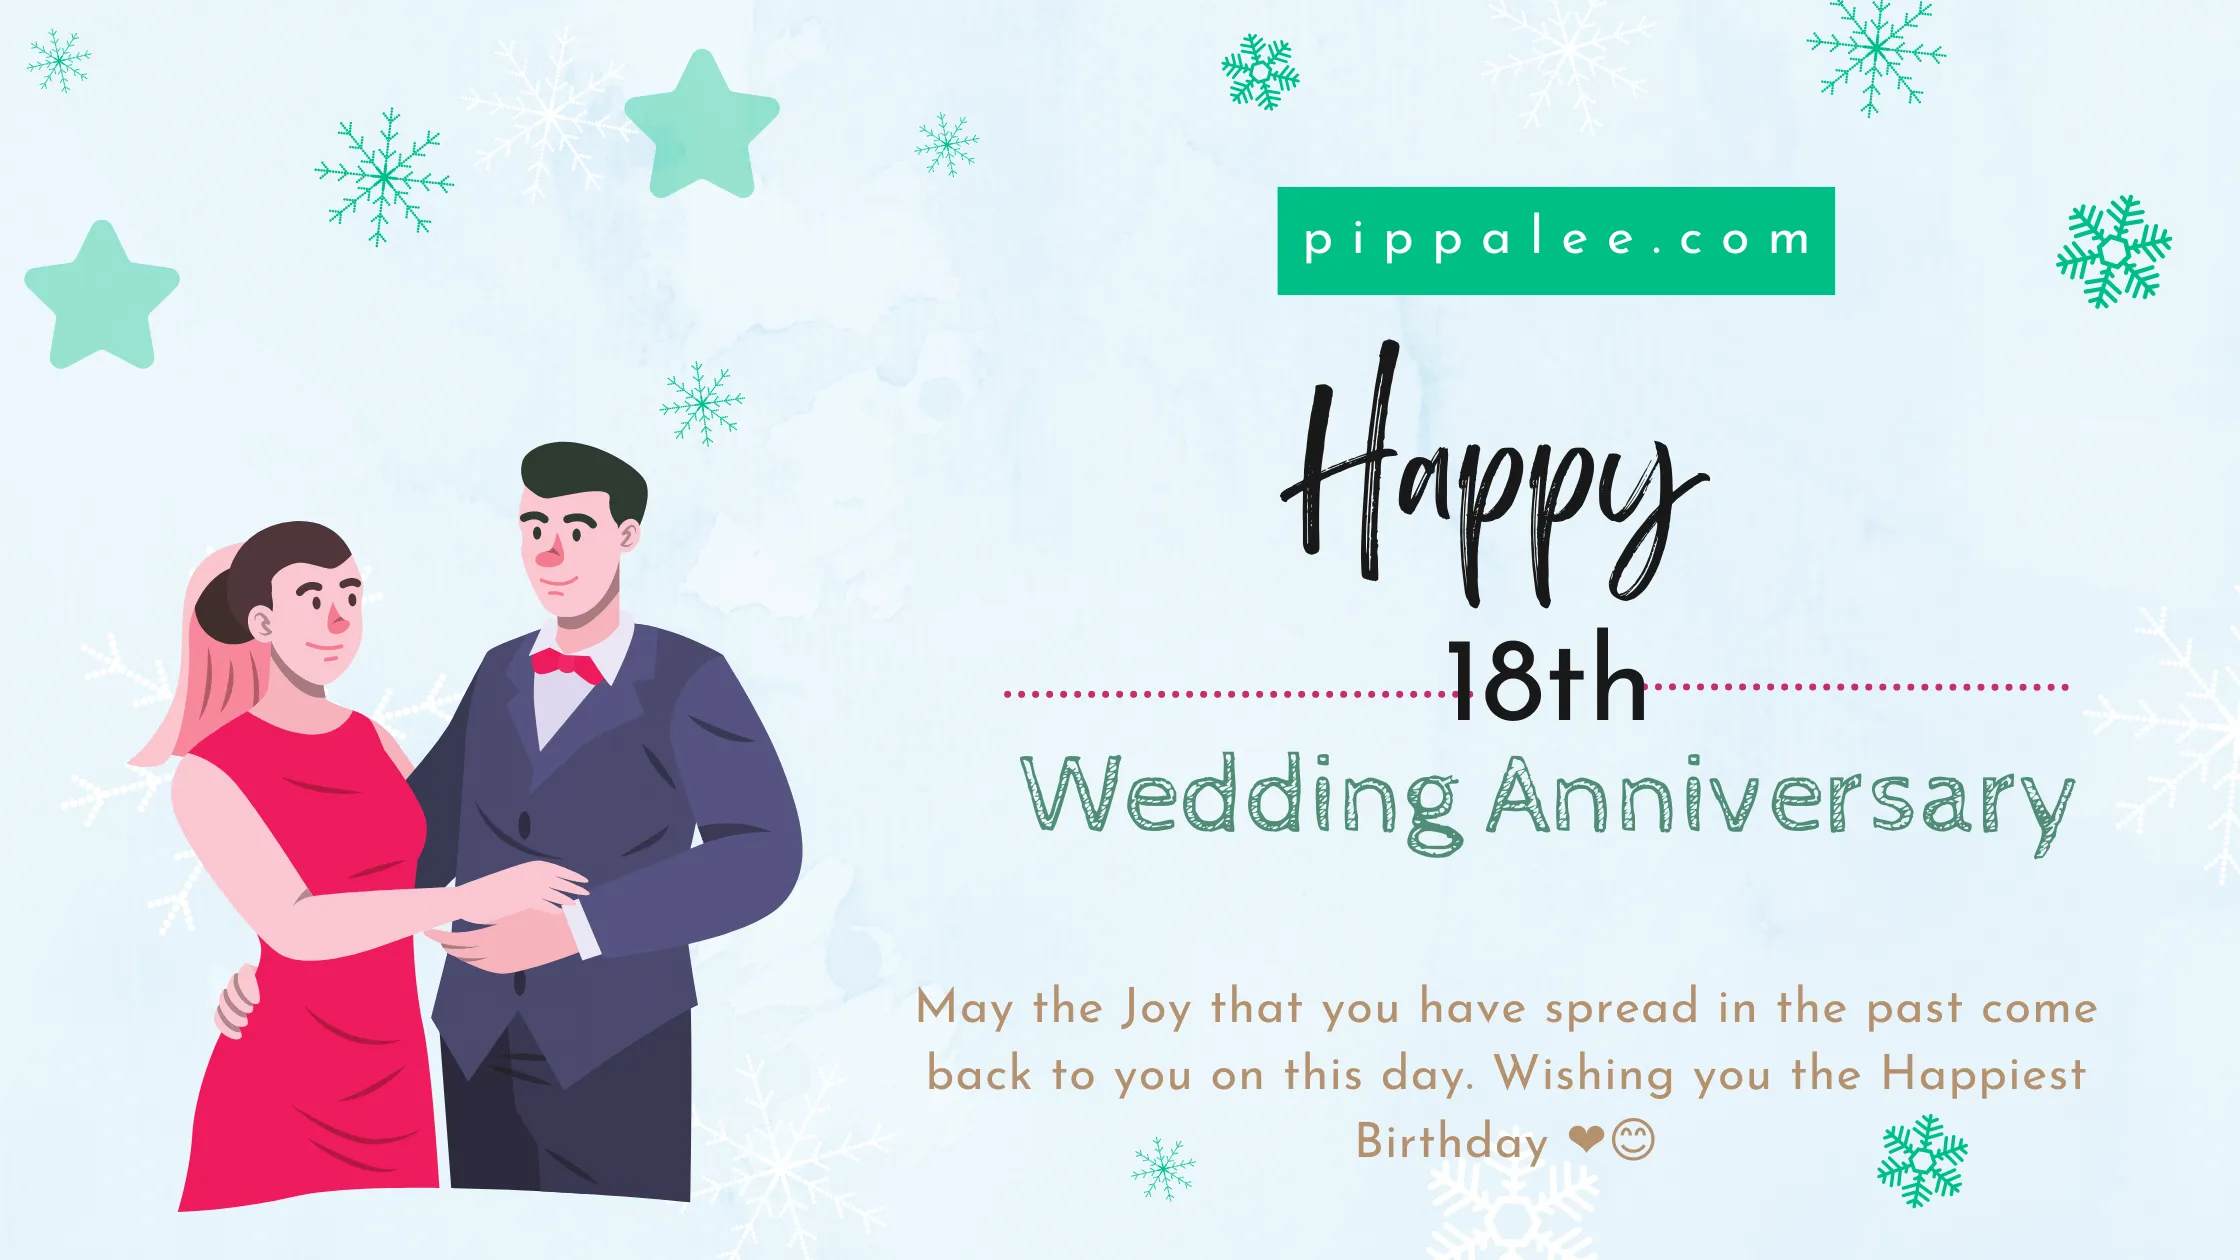 18th Wedding Anniversary - Wishes & Messages